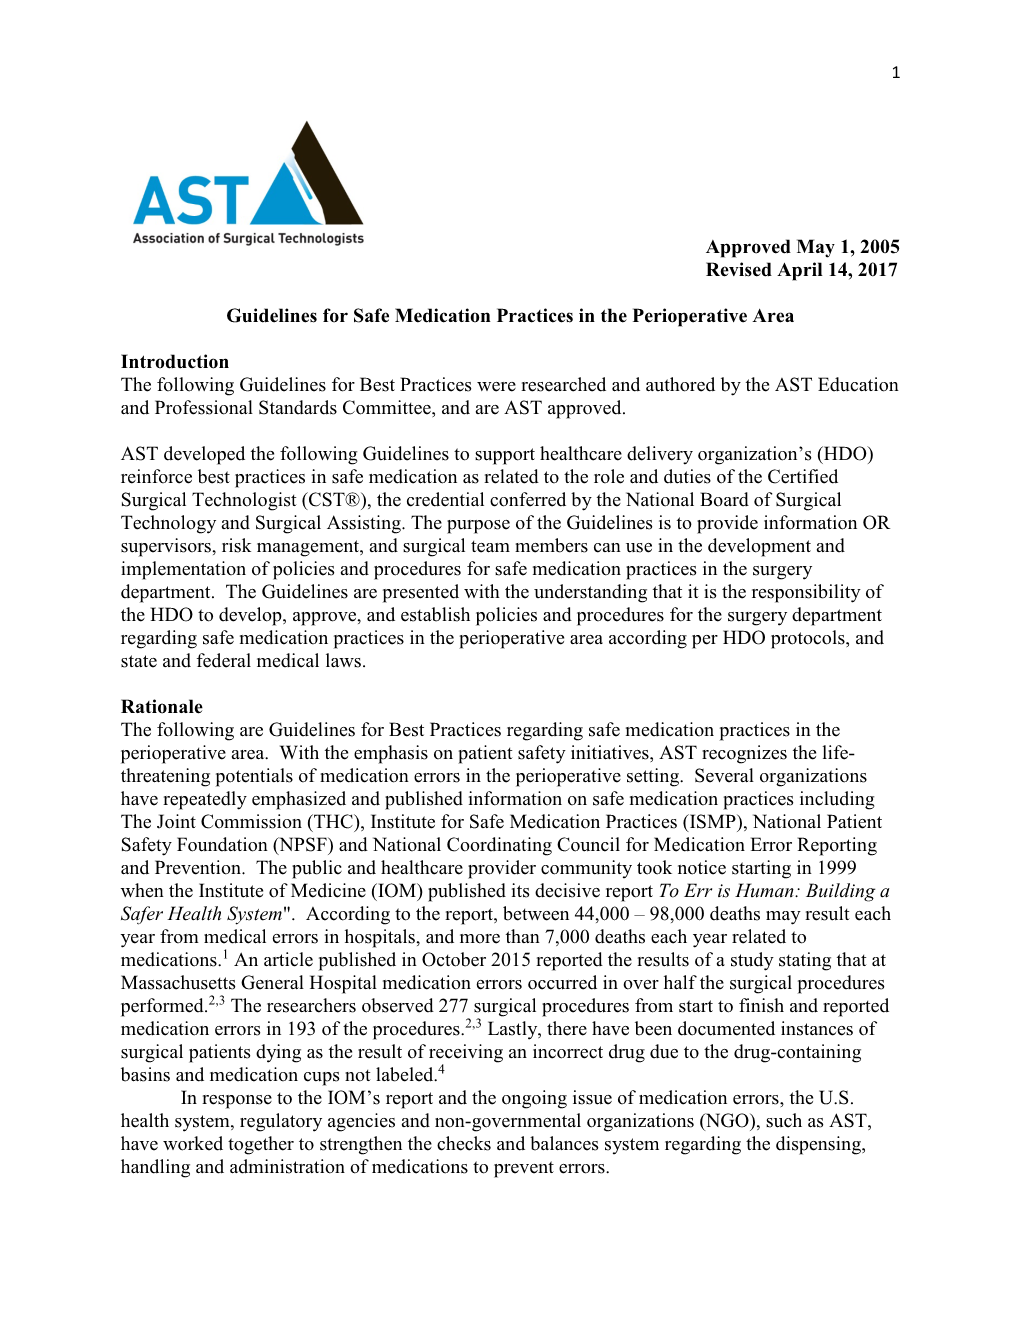 AST Guidelines for Safe Medication Practices in the Perioperative Area